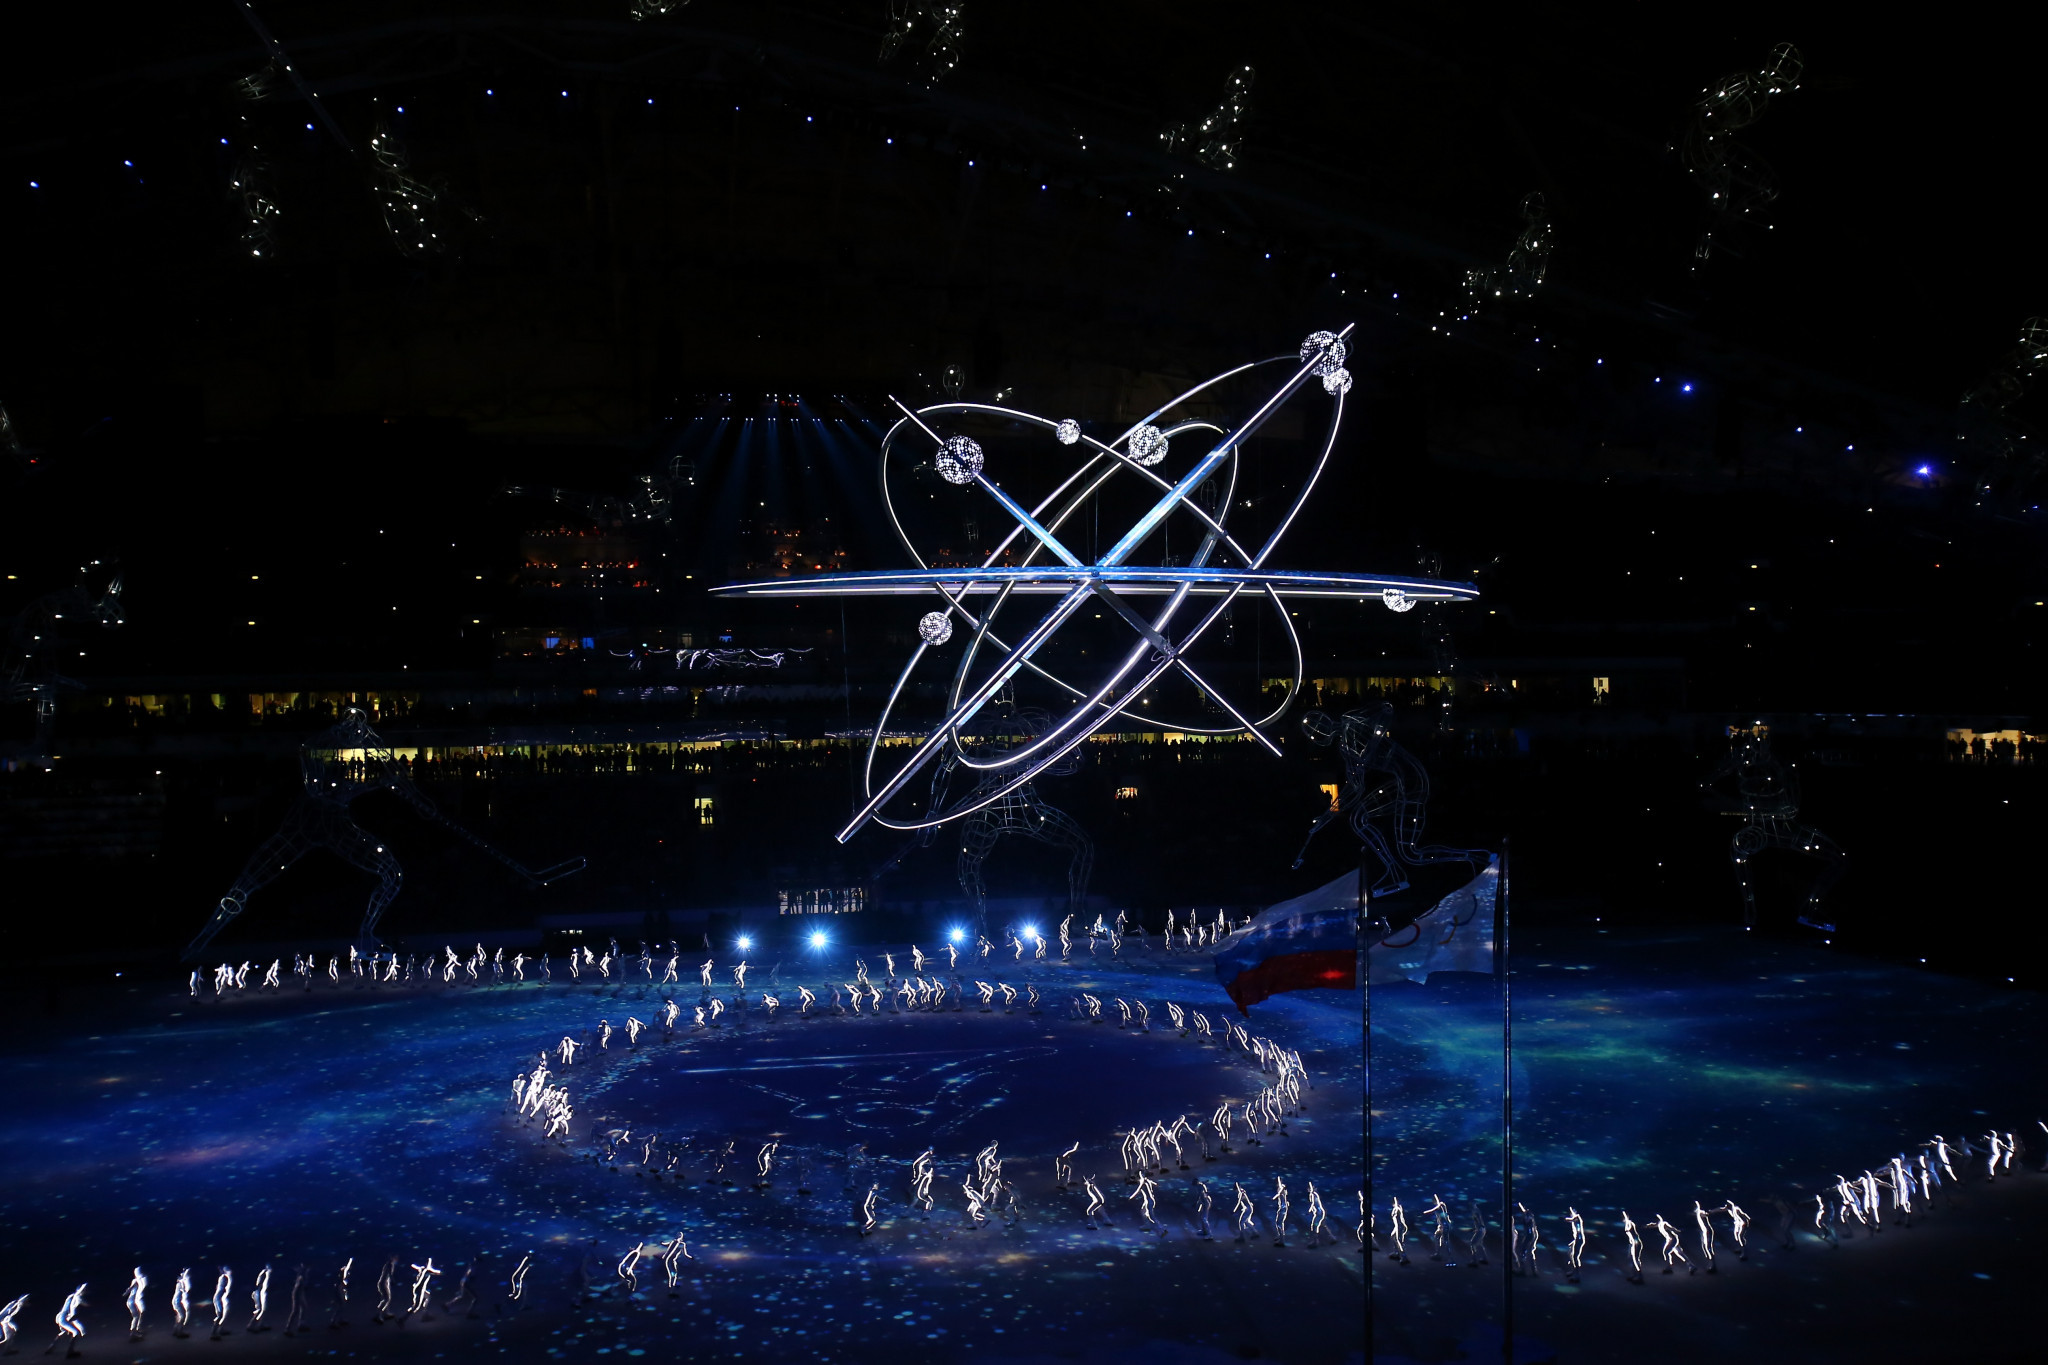 Balich Worldwide Shows helped produce the Opening Ceremony for the 2014 Winter Olympic Games in Sochi ©Getty Images